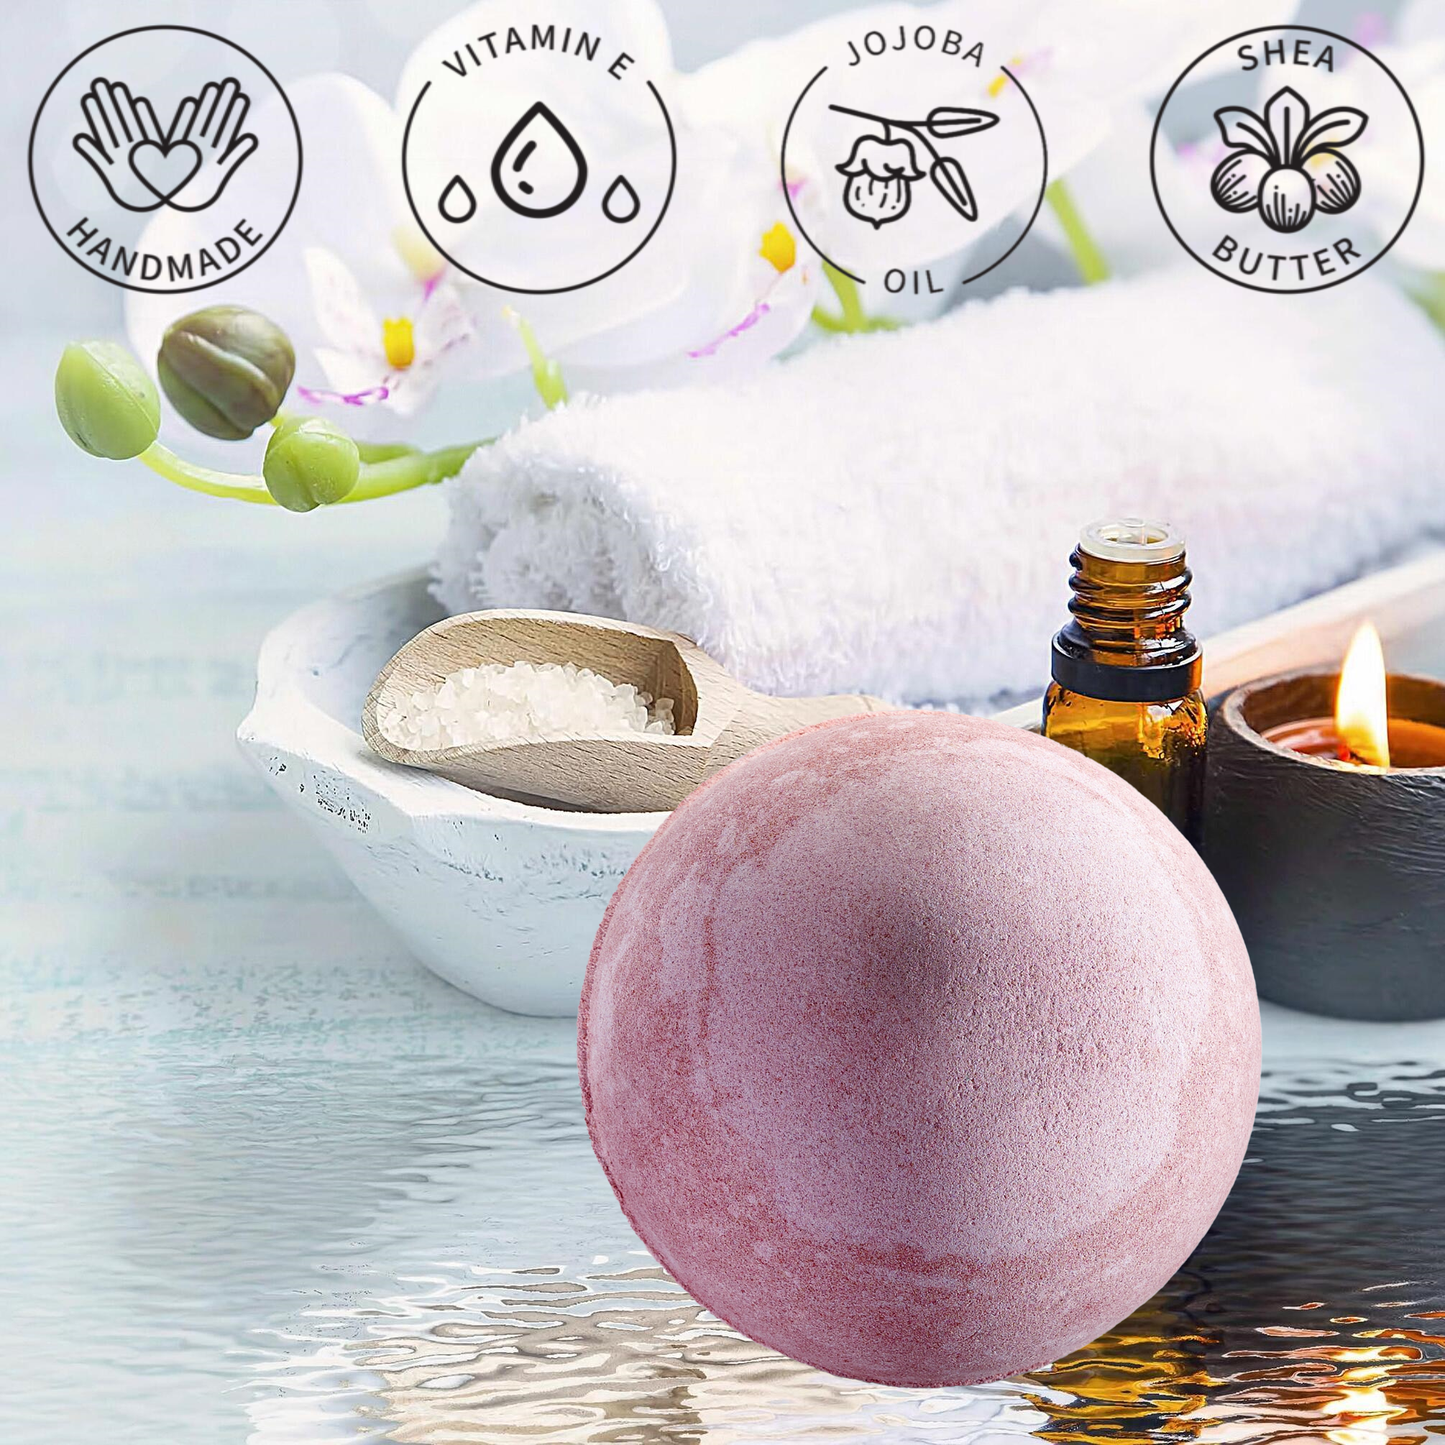 lovery sandalwood bath bomb, sandalwood bath bomb, Sandalwood Bubble Bath Bliss, Fizzy Bath Bomb Delight, Moisturizing Cocoa and Shea Butter, Skin Healing Properties, Antioxidant-Rich Spa Bath, Nourishing Bath Essentials, Vitamin E and Shea Butter Spa, Cruelty-Free Bath Bombs, Clean and Authentic Ingredients, Handmade Love for Self-Care